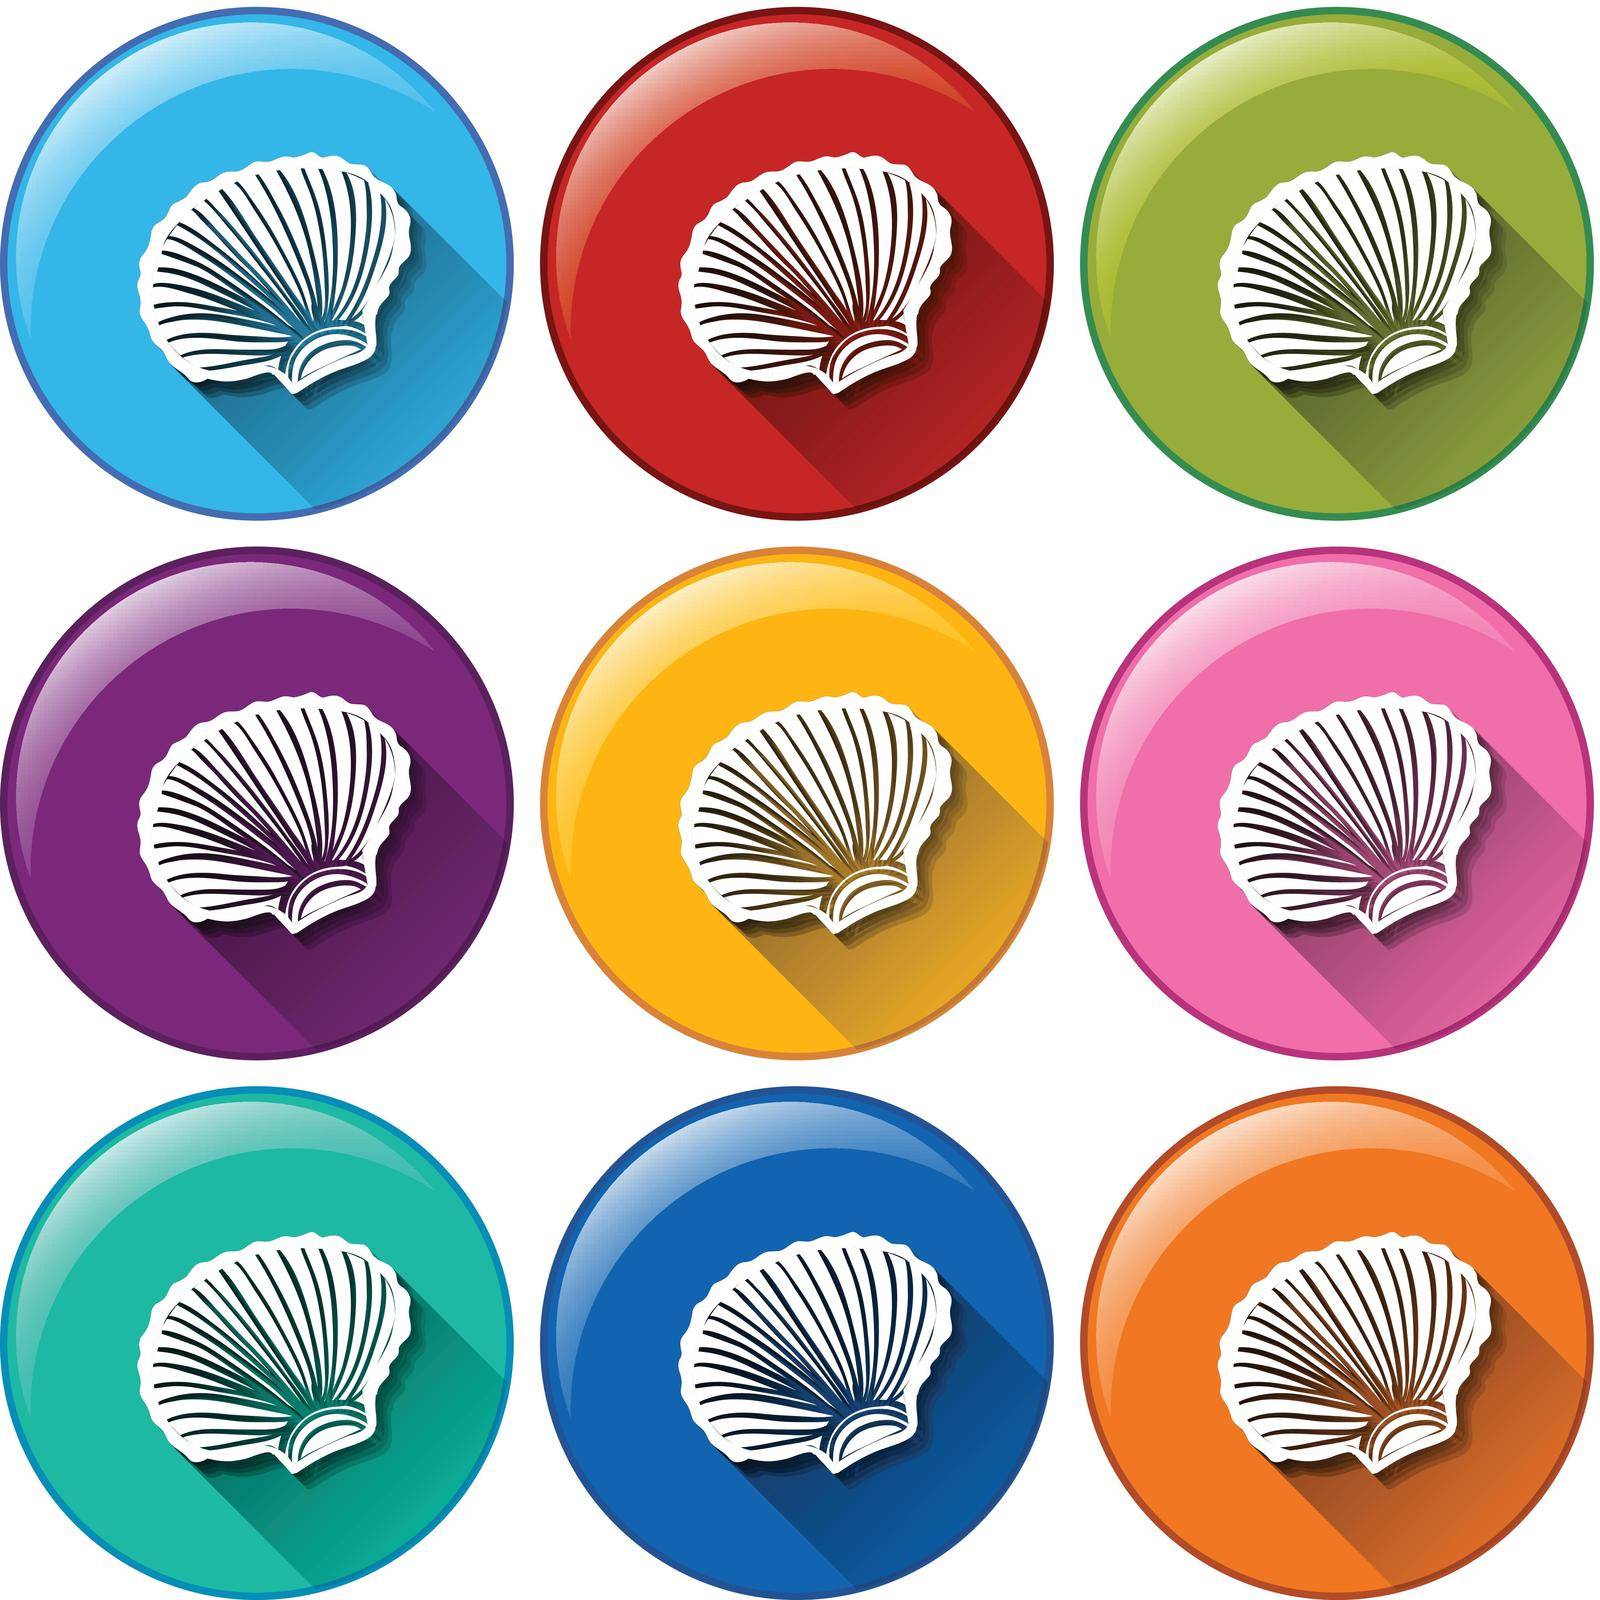 Illustration of the buttons with seashells on a white background